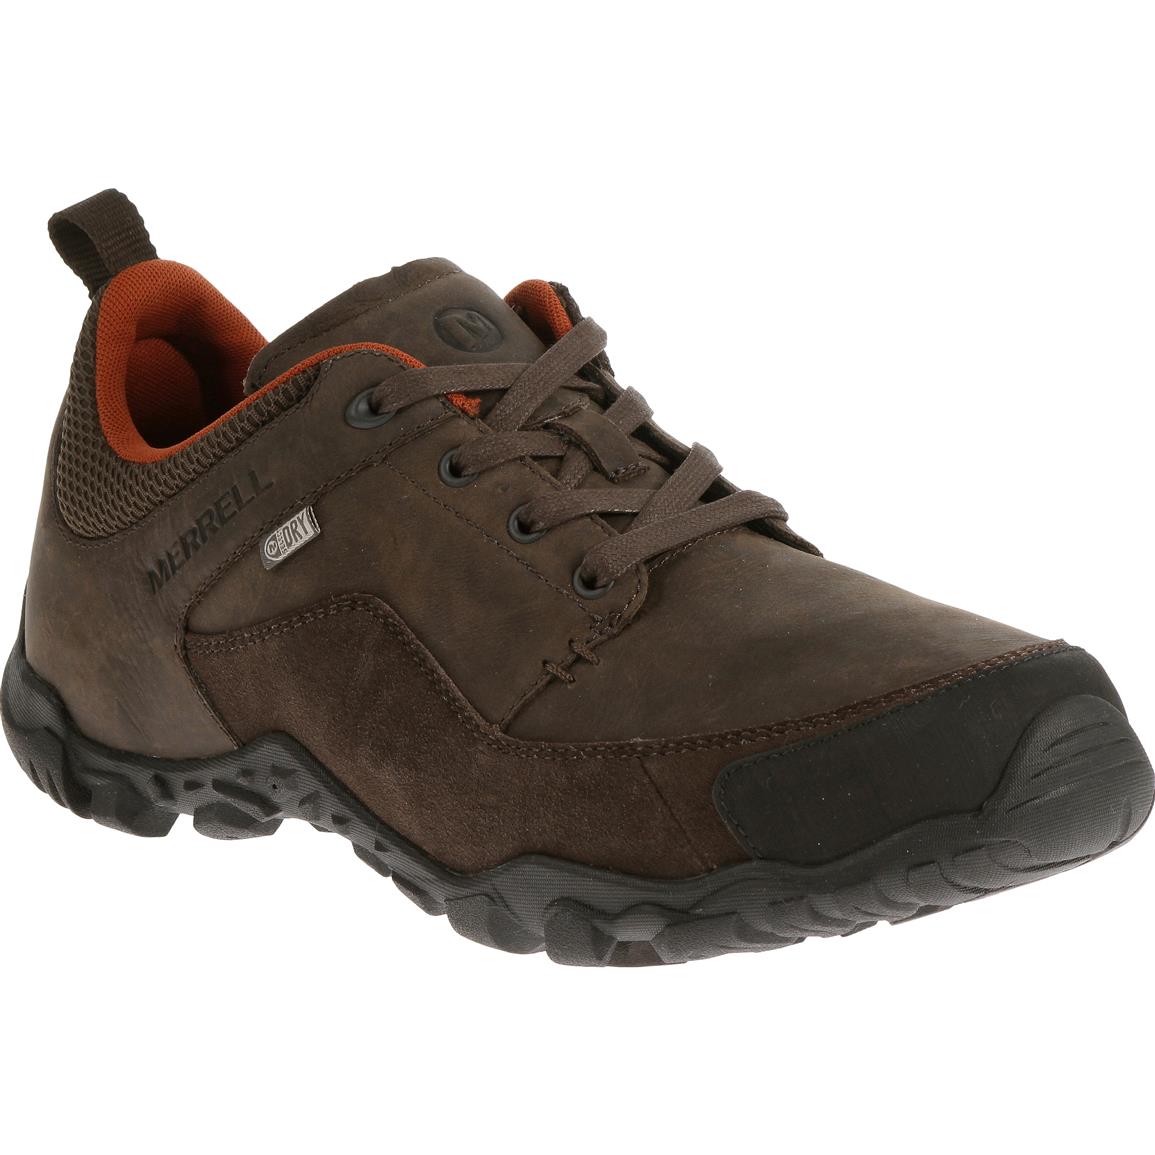 Merrell Telluride Waterproof Shoes, Espresso - 654143, Casual Shoes at